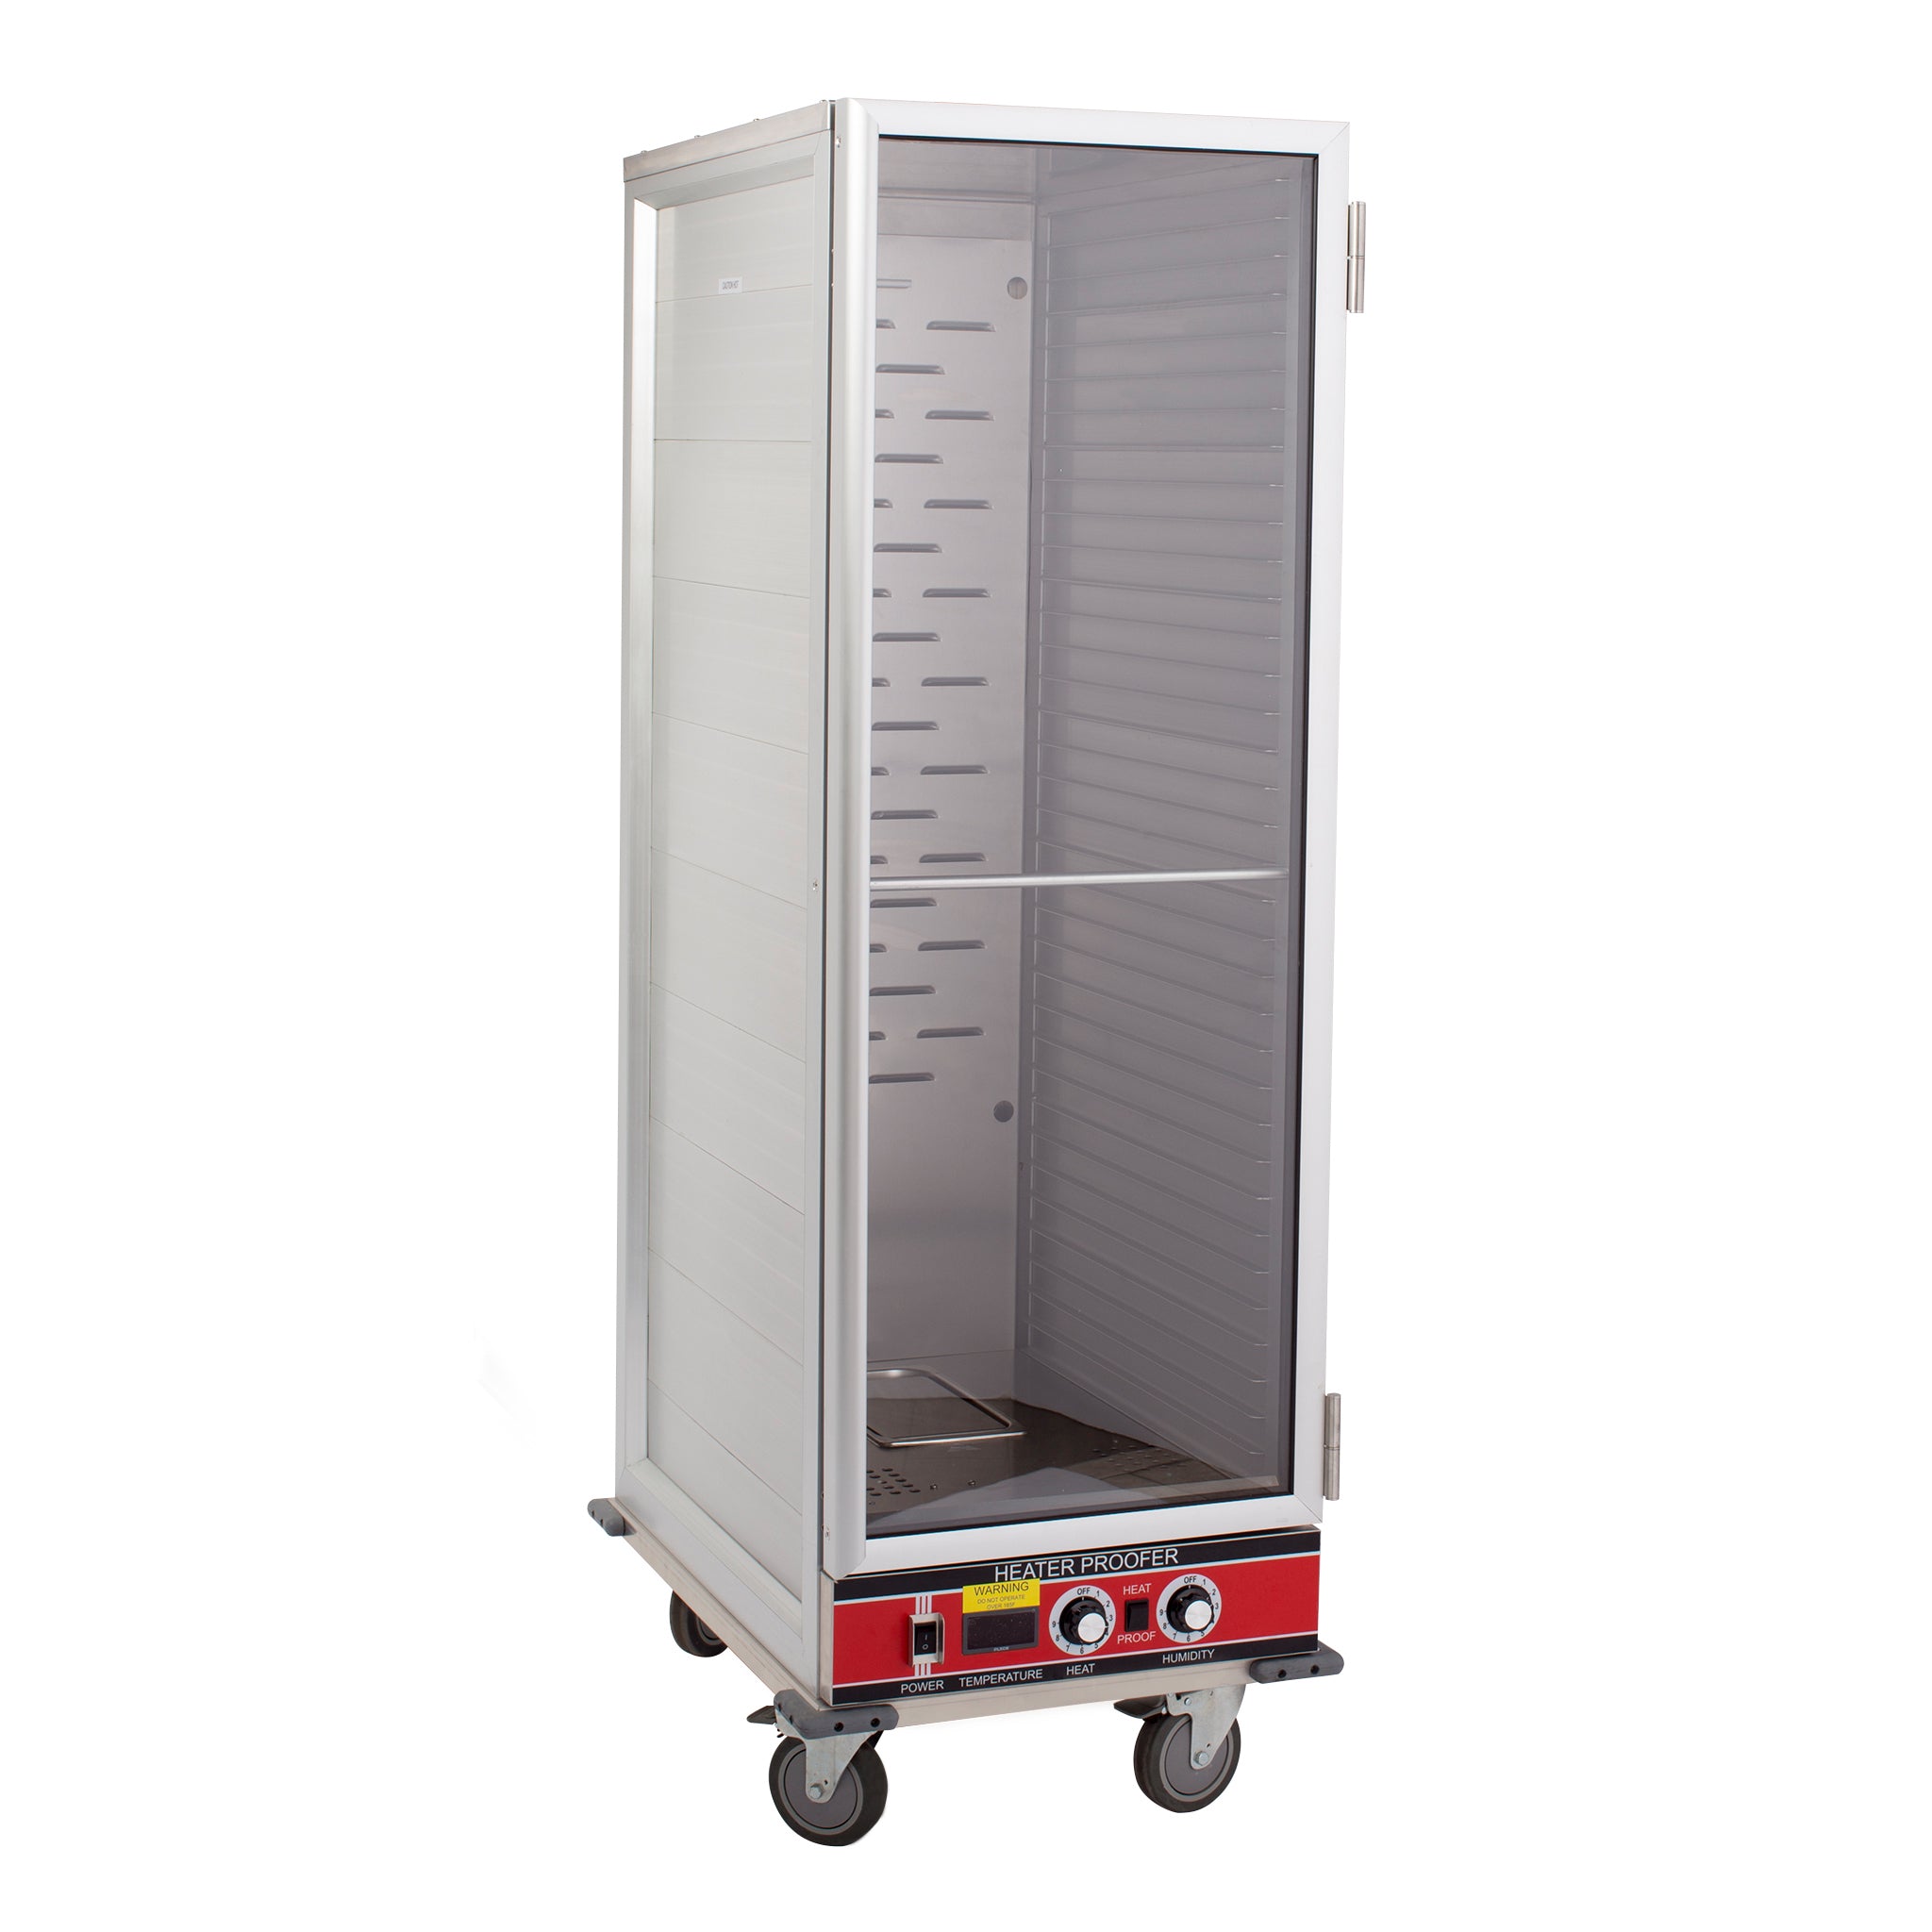 BevLes - HPC-6836, BevLes Full Size Non-Insulated HPC Proofing & Holding Cabinet, 1 Clear Door, in Silver